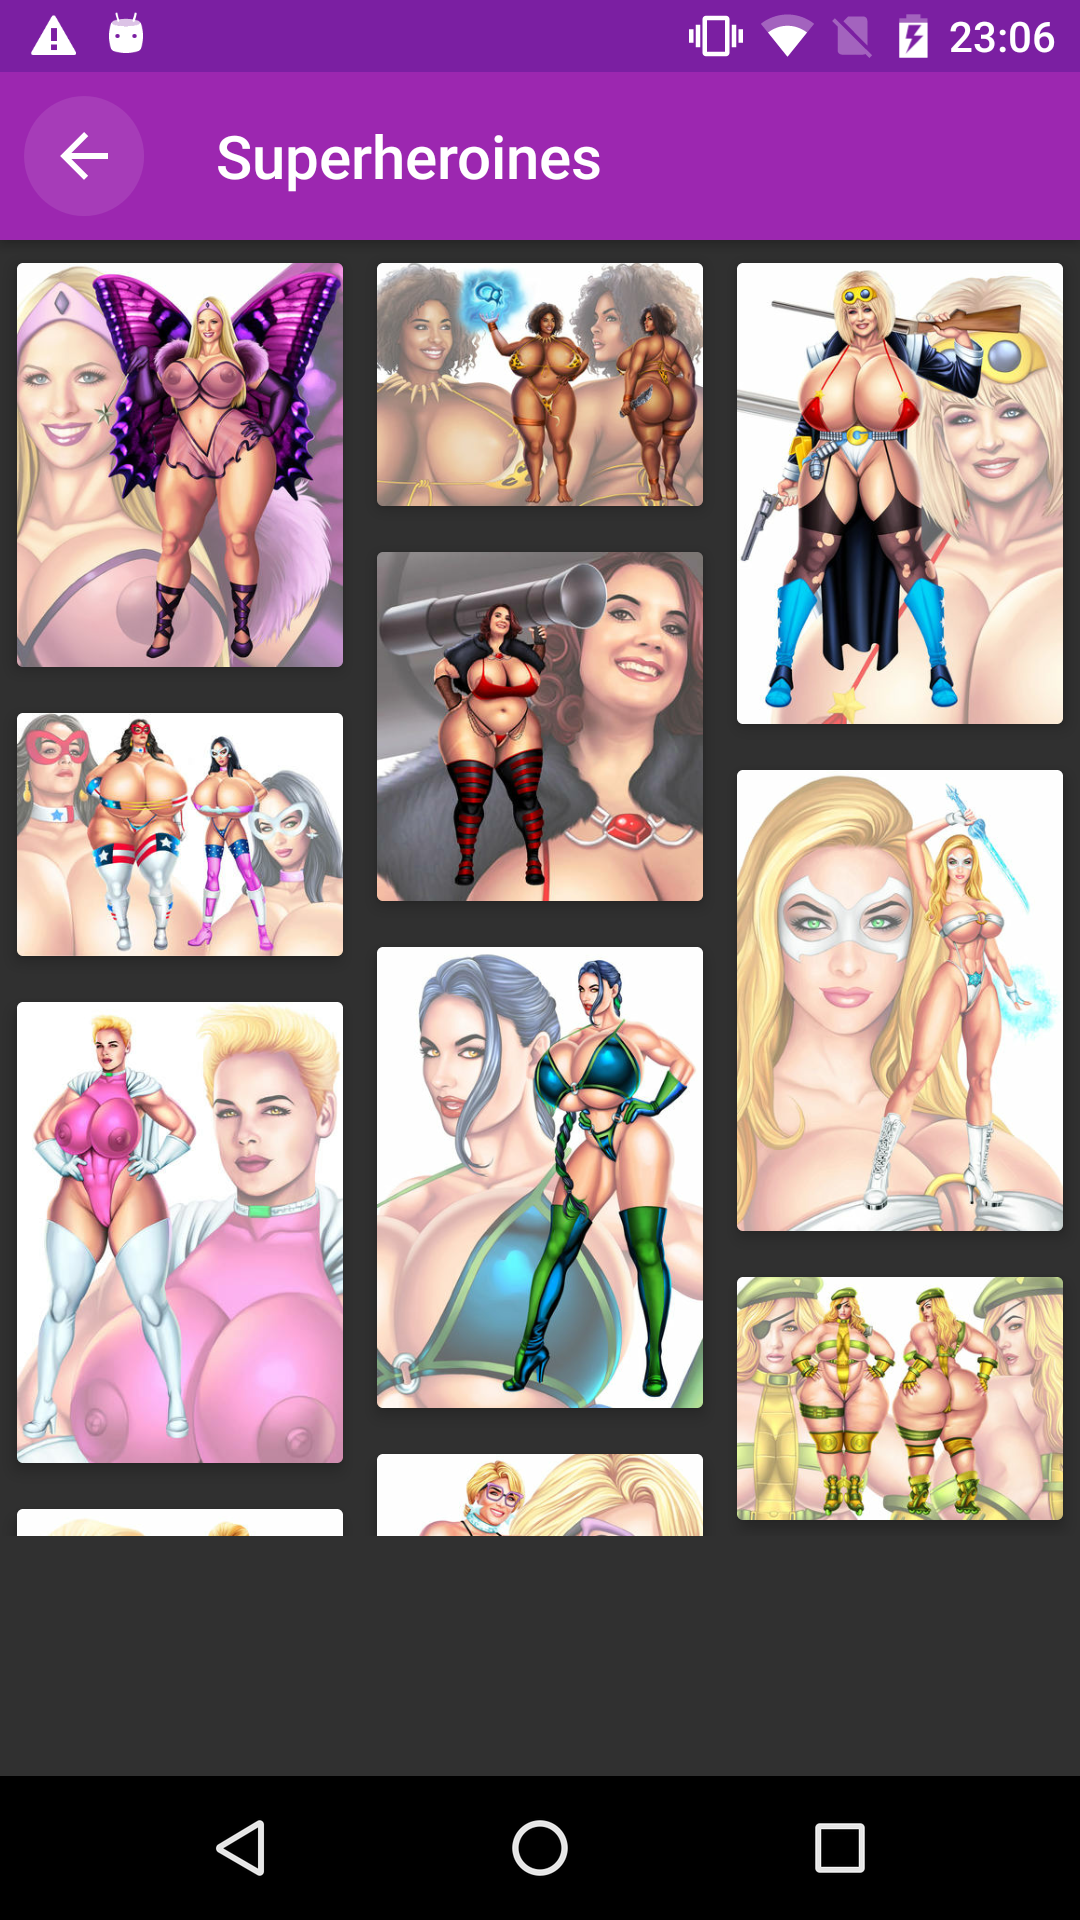 Superheroines wallpaper,top,henrai,porn,download,latest,images,comics,good,hentai,pornstar,erotic,superheroines,henti,pegging,apps,collection,pics,hot,sexy,for,app,android,hentei